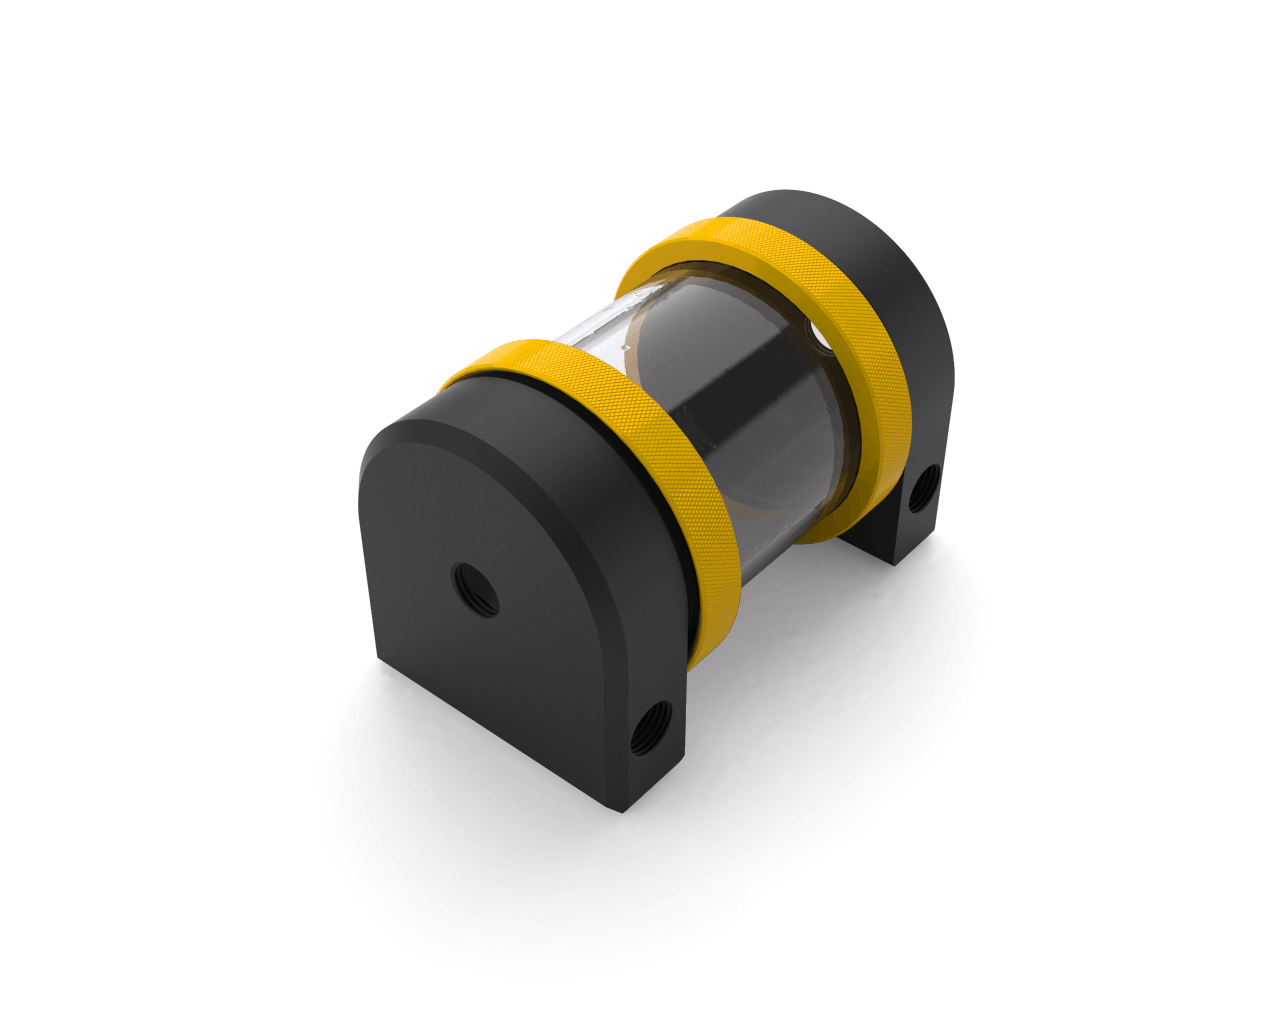 PrimoChill CTR Hard Mount Phase II Reservoir - Black POM - 80mm - PrimoChill - KEEPING IT COOL Yellow